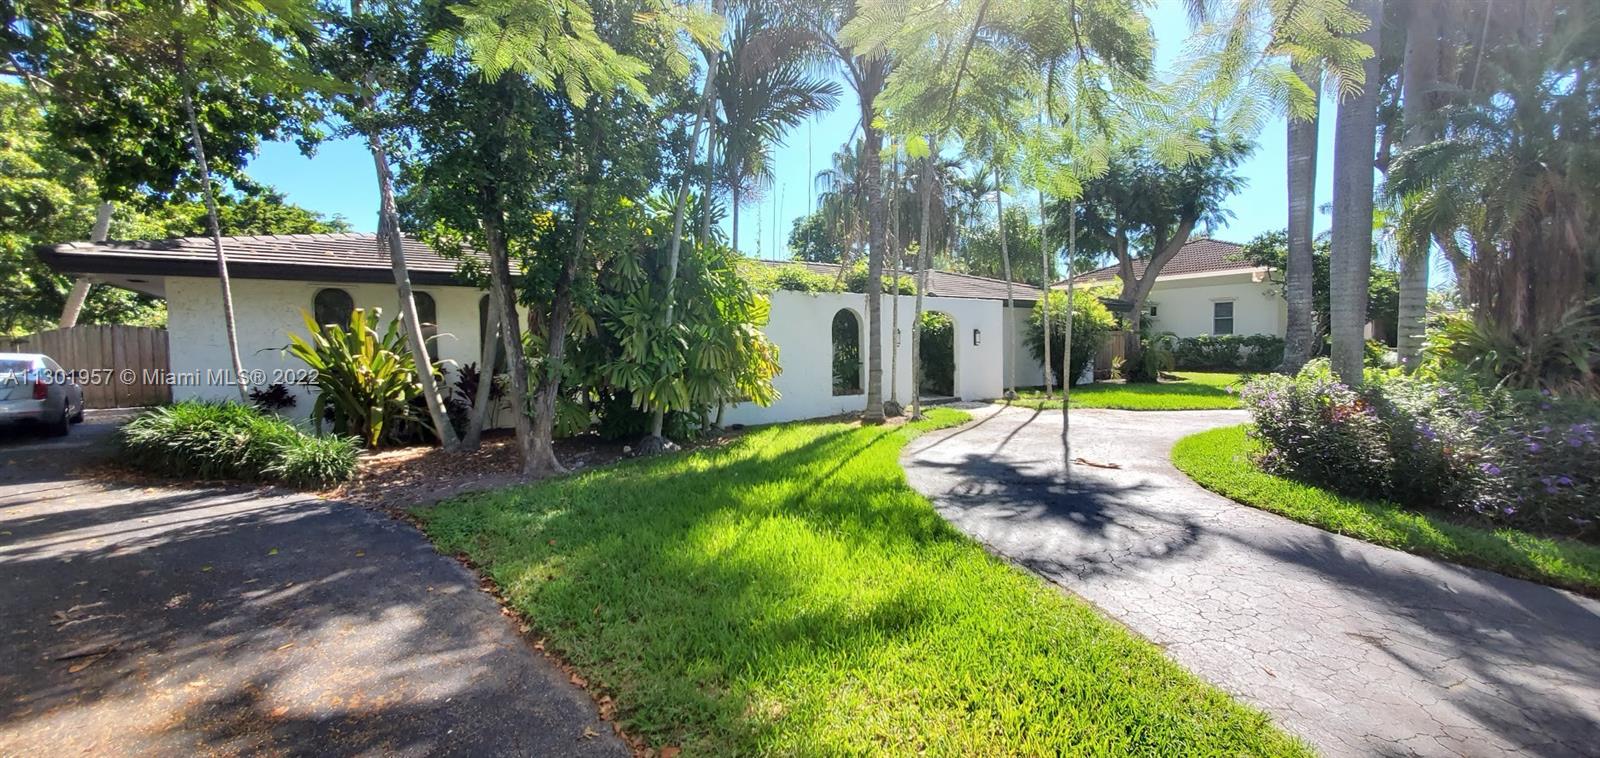 Beautifully remodeled single-family home with pool and lush landscape nested next to CORAL REEF PARK off 152 St located in sought-after palmetto Bay! Property finishes include Custom kitchen with Quartz countertops, Stainless steel appliances and indoor laundry room off of kitchen with custom cabinets washer/dryer. Flooring has travertine and marble meticulously installed throughout.  Master bath has deep soaking tub and nice fixtures. Home has impacted windows, with new roof, Pool was recently Resurface.